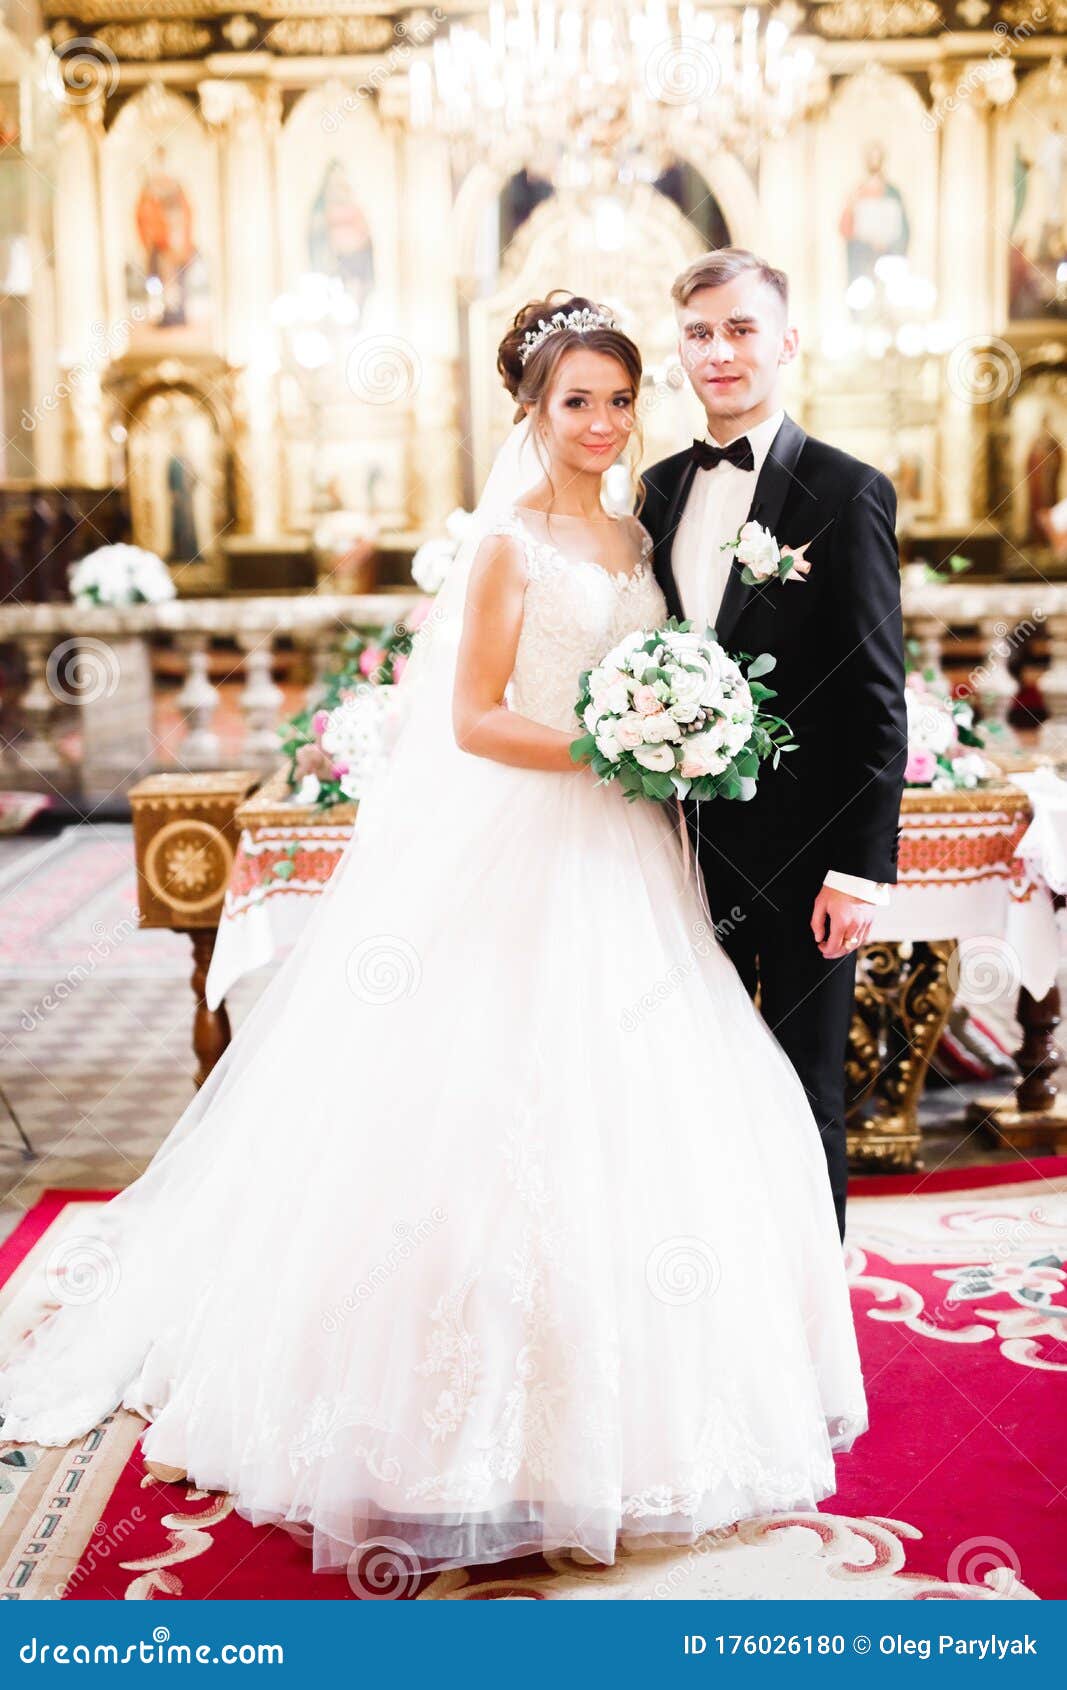 Married Couple Posing in a Church after Ceremony Stock Photo ...